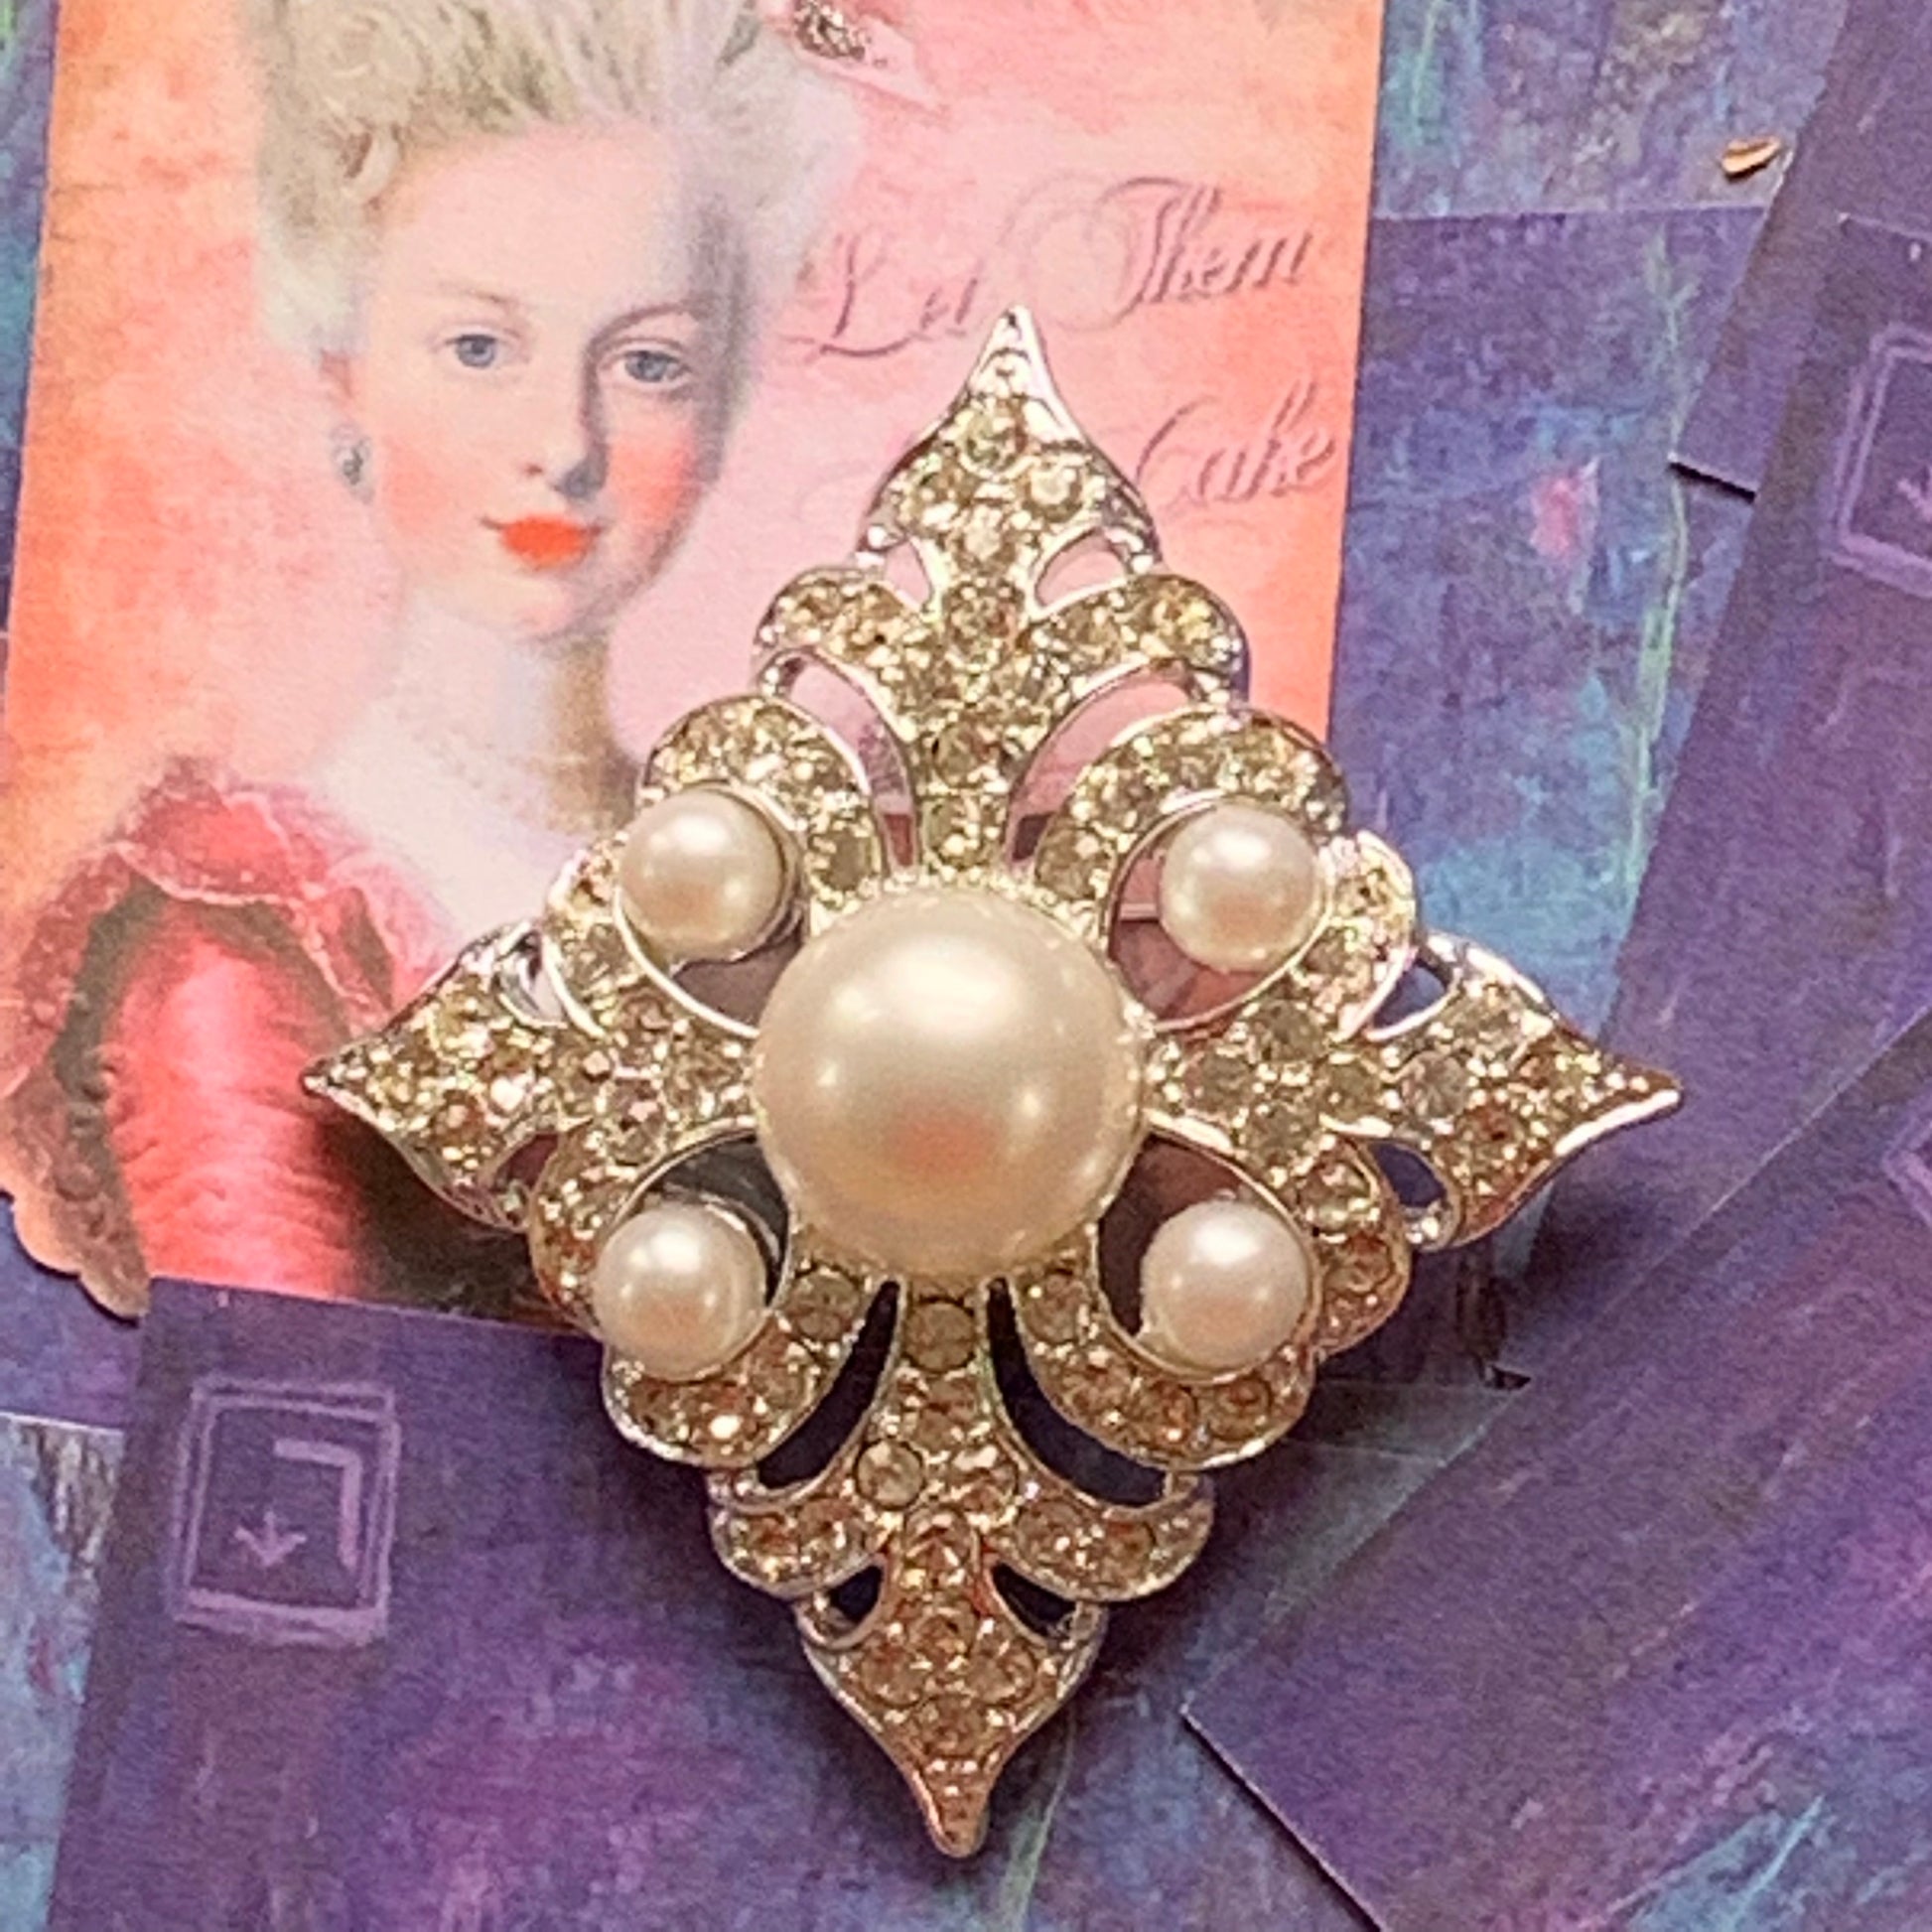 Vintage Sarah Coventry Faux Pearl Encrusted Rhinestone Pin - Lady Slippers